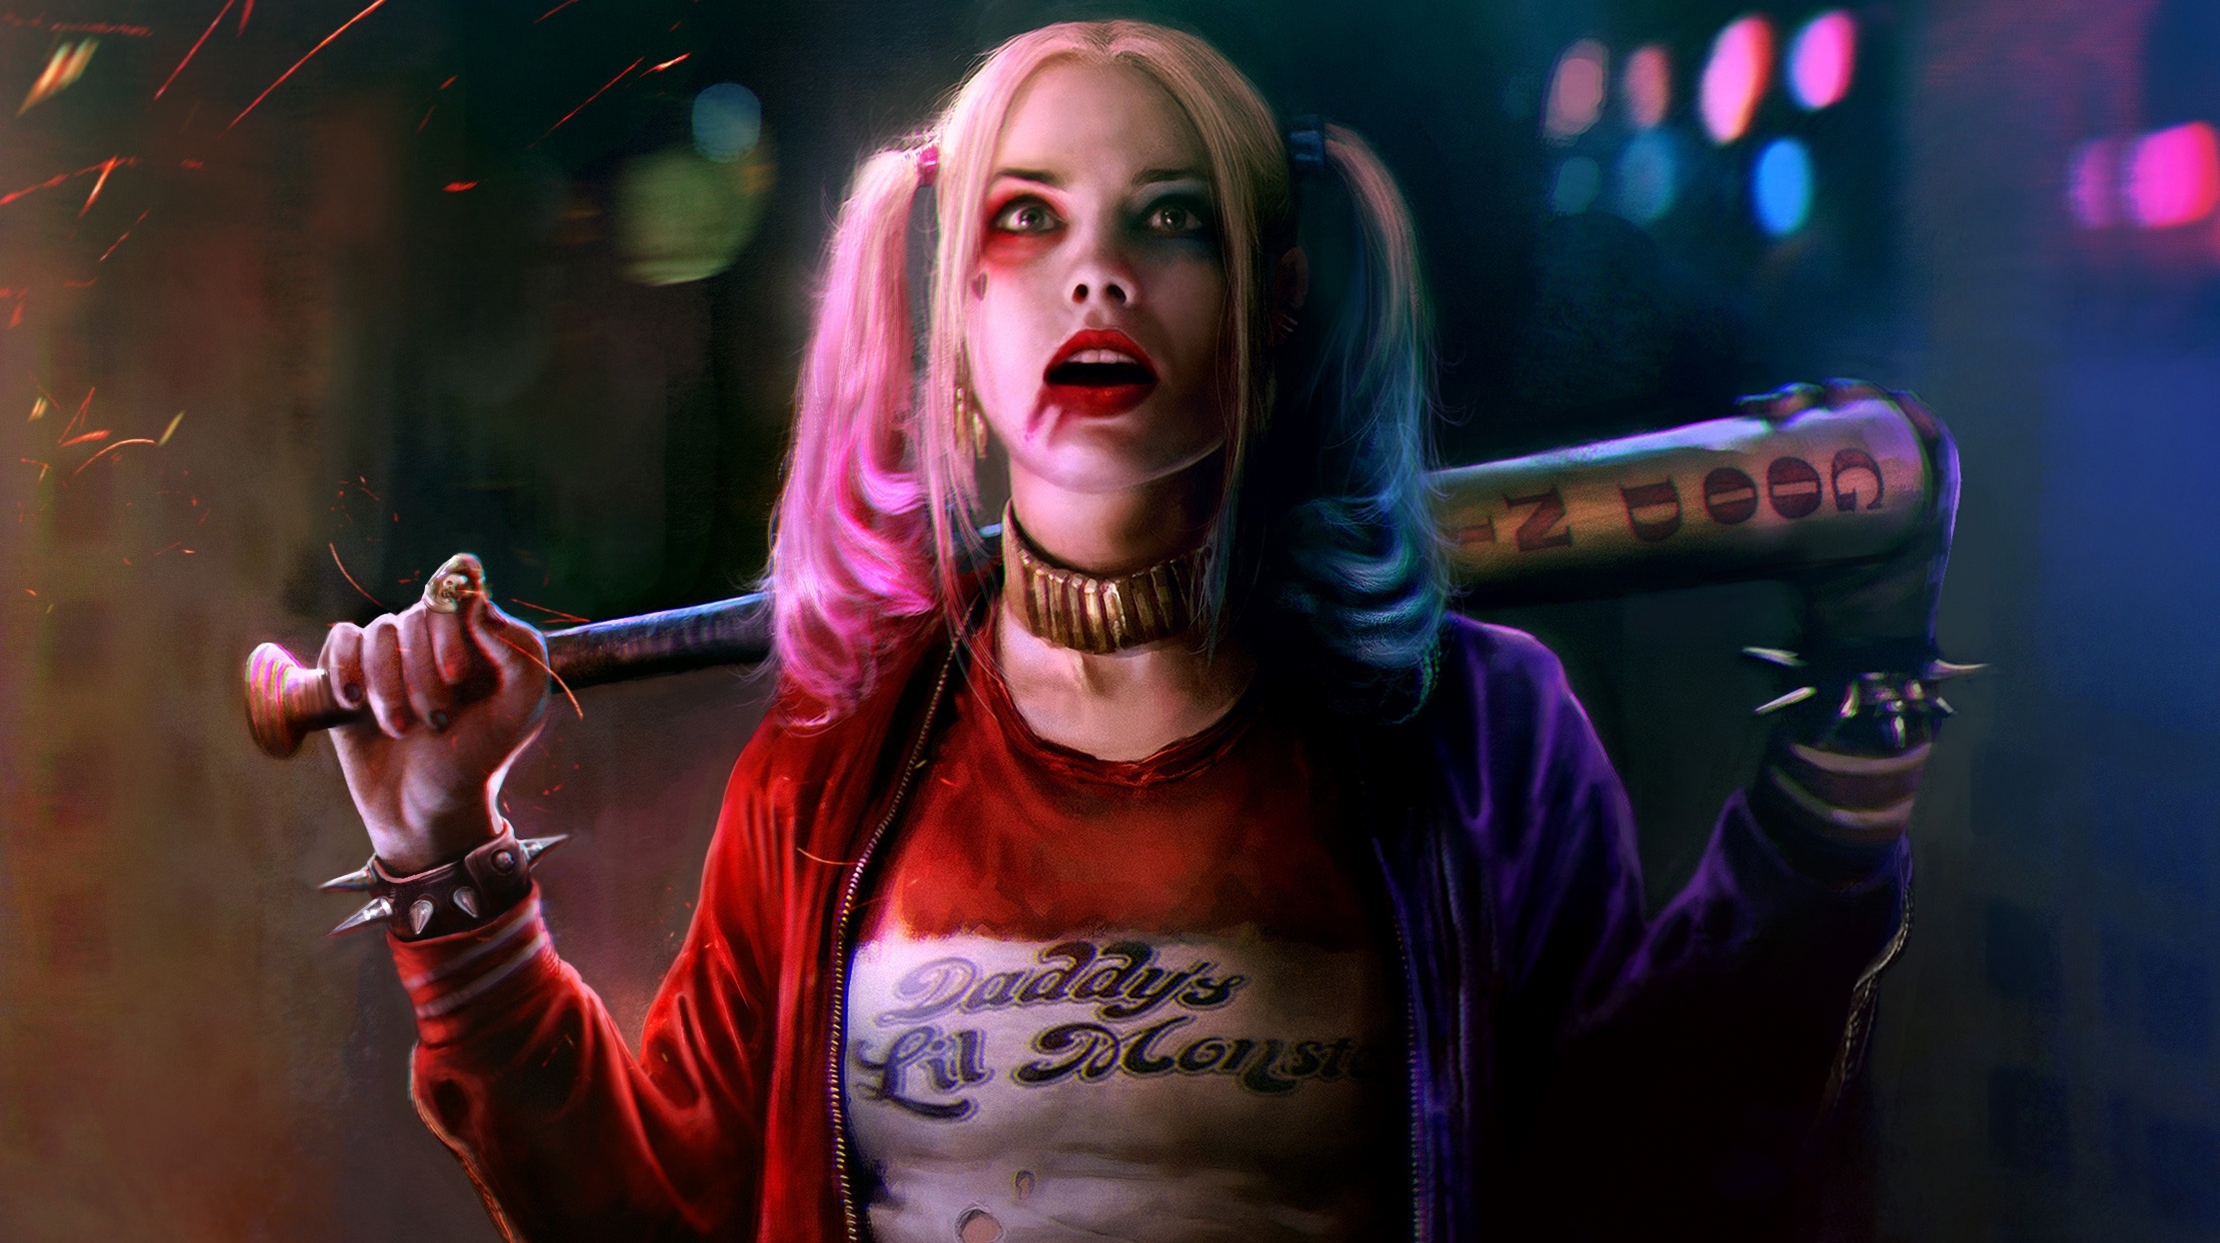 android blonde, harley quinn, movie, collar, suicide squad, margot robbie, baseball bat, dc comics, spikes, two toned hair